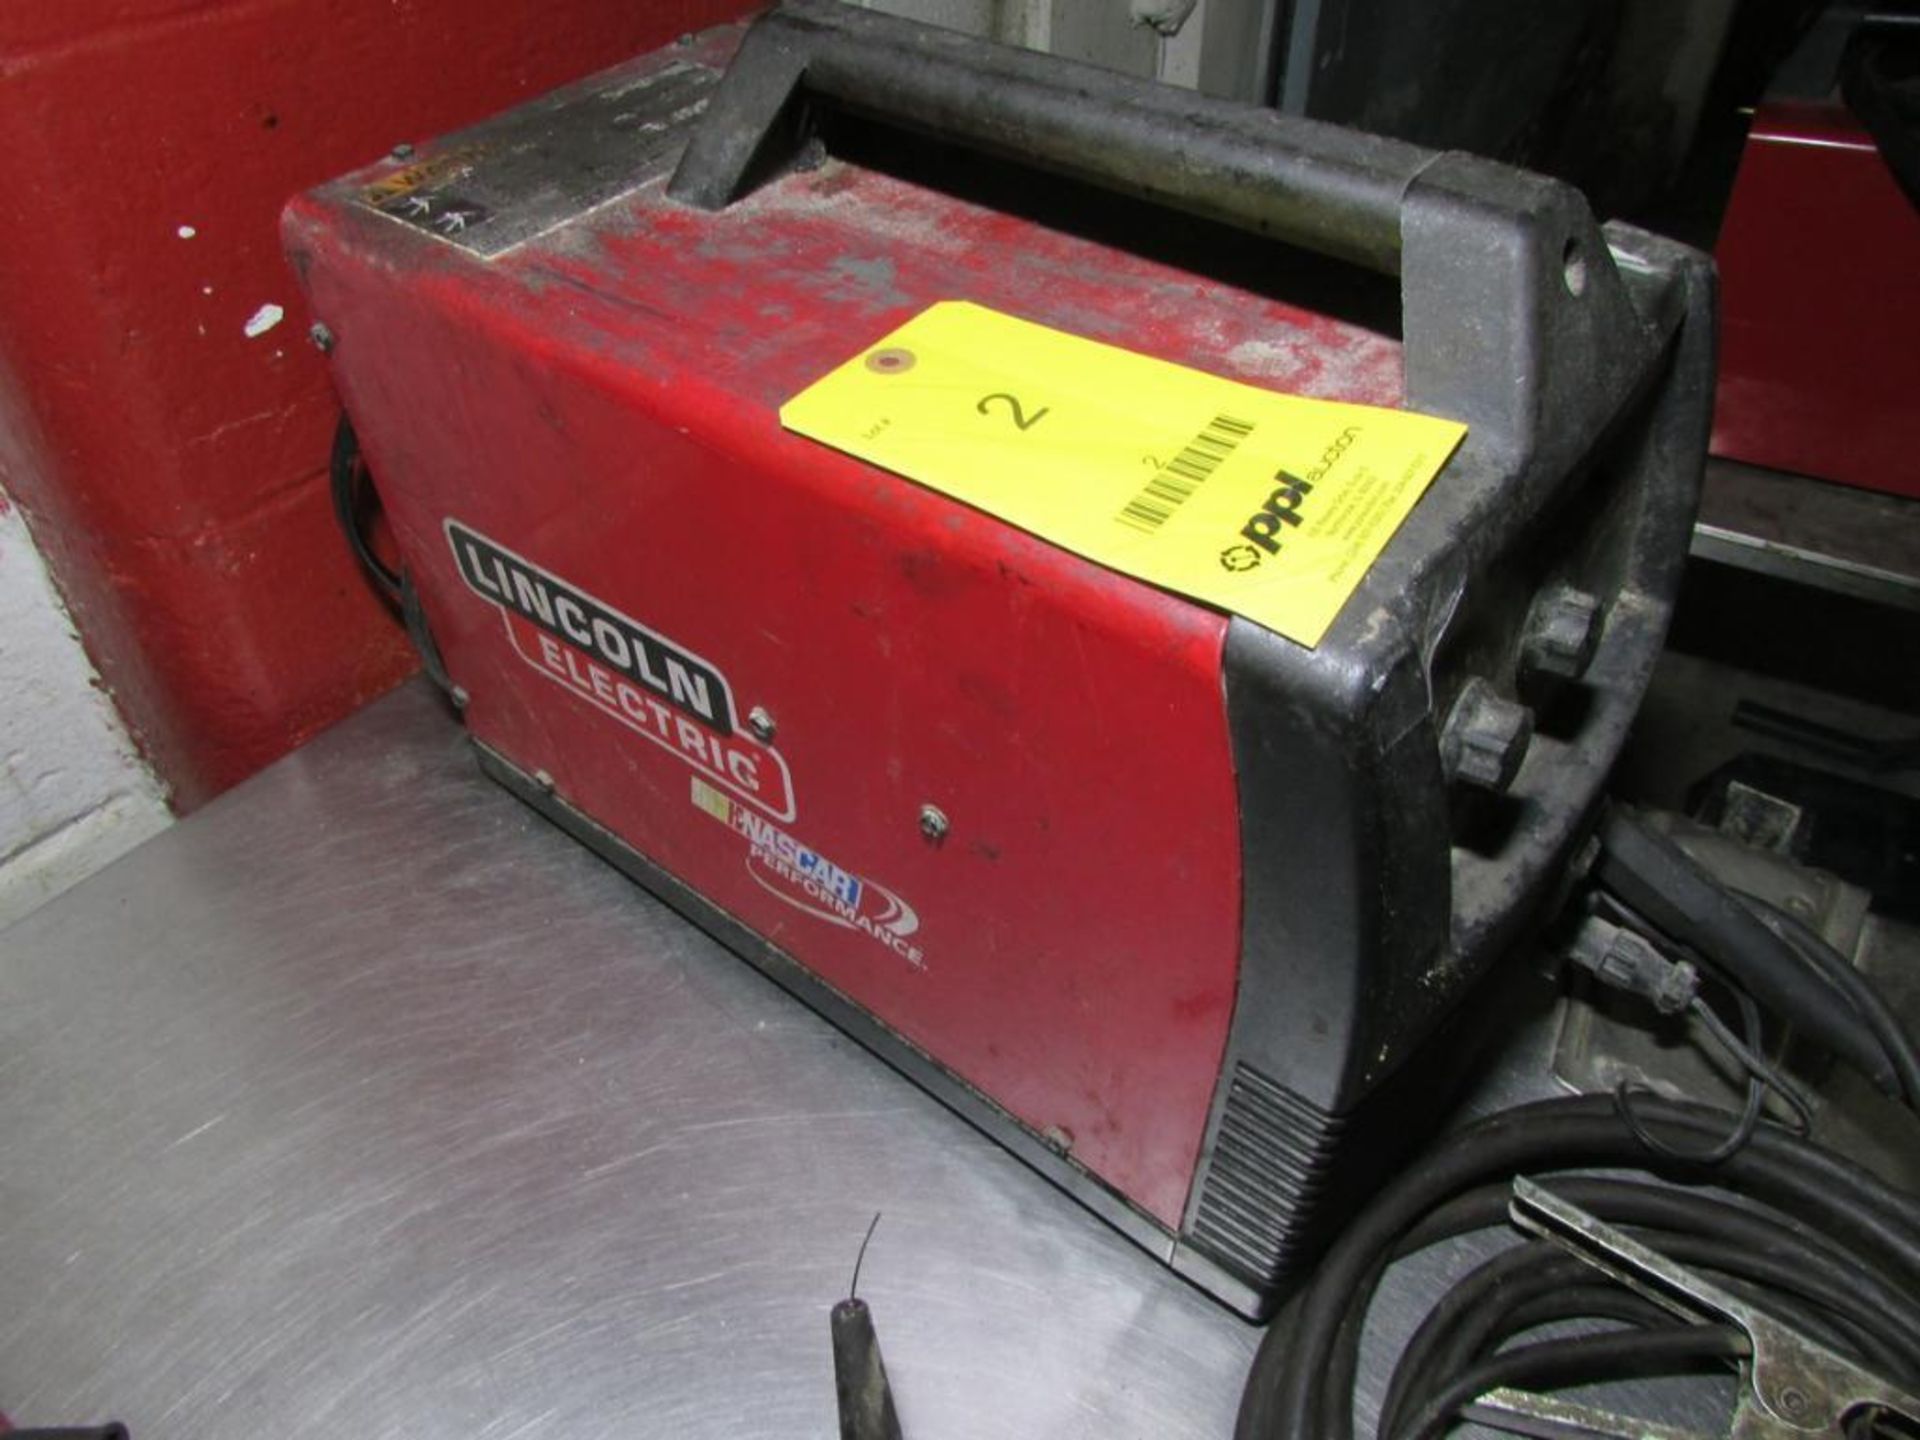 Lincoln Electric Pro Core 125 MIG Wire Welder. 30-125A, 90A 19V 20% Duty Cycle Output, 120V 20A 60Hz - Image 4 of 7